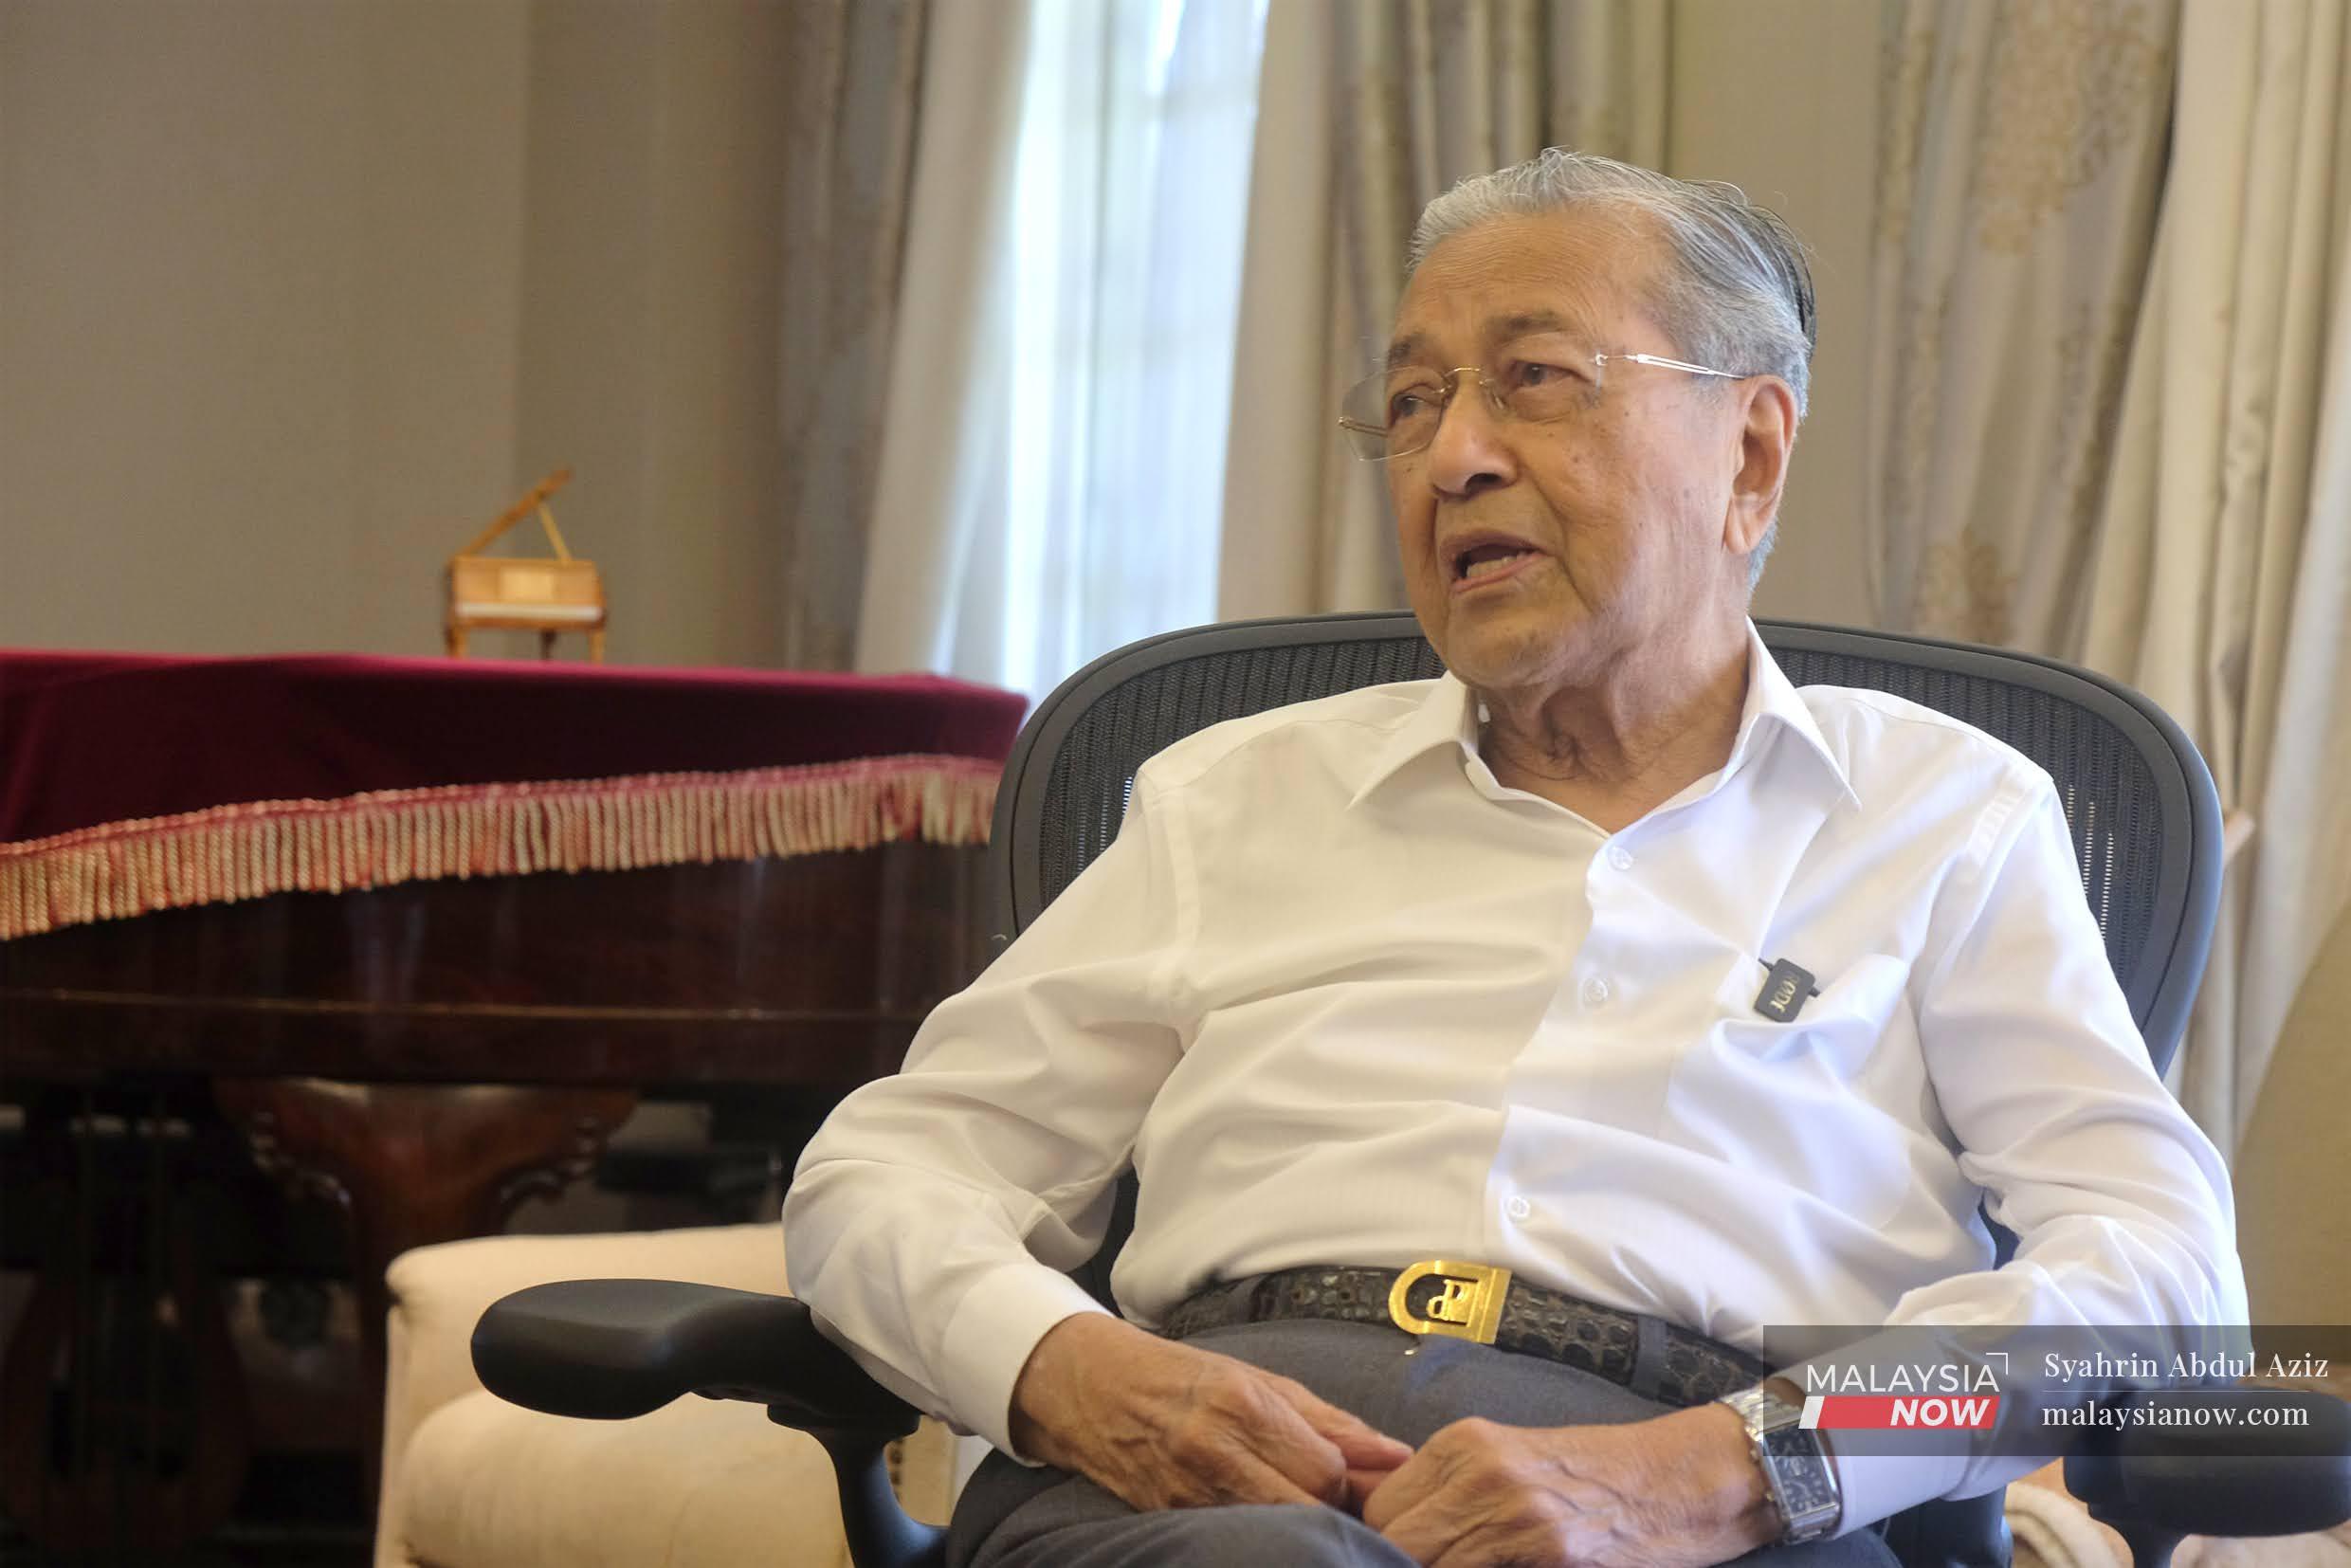 Former prime minister Dr Mahathir Mohamad speaks in an interview with MalaysiaNow at his residence in Sri Kembangan, Kuala Lumpur.